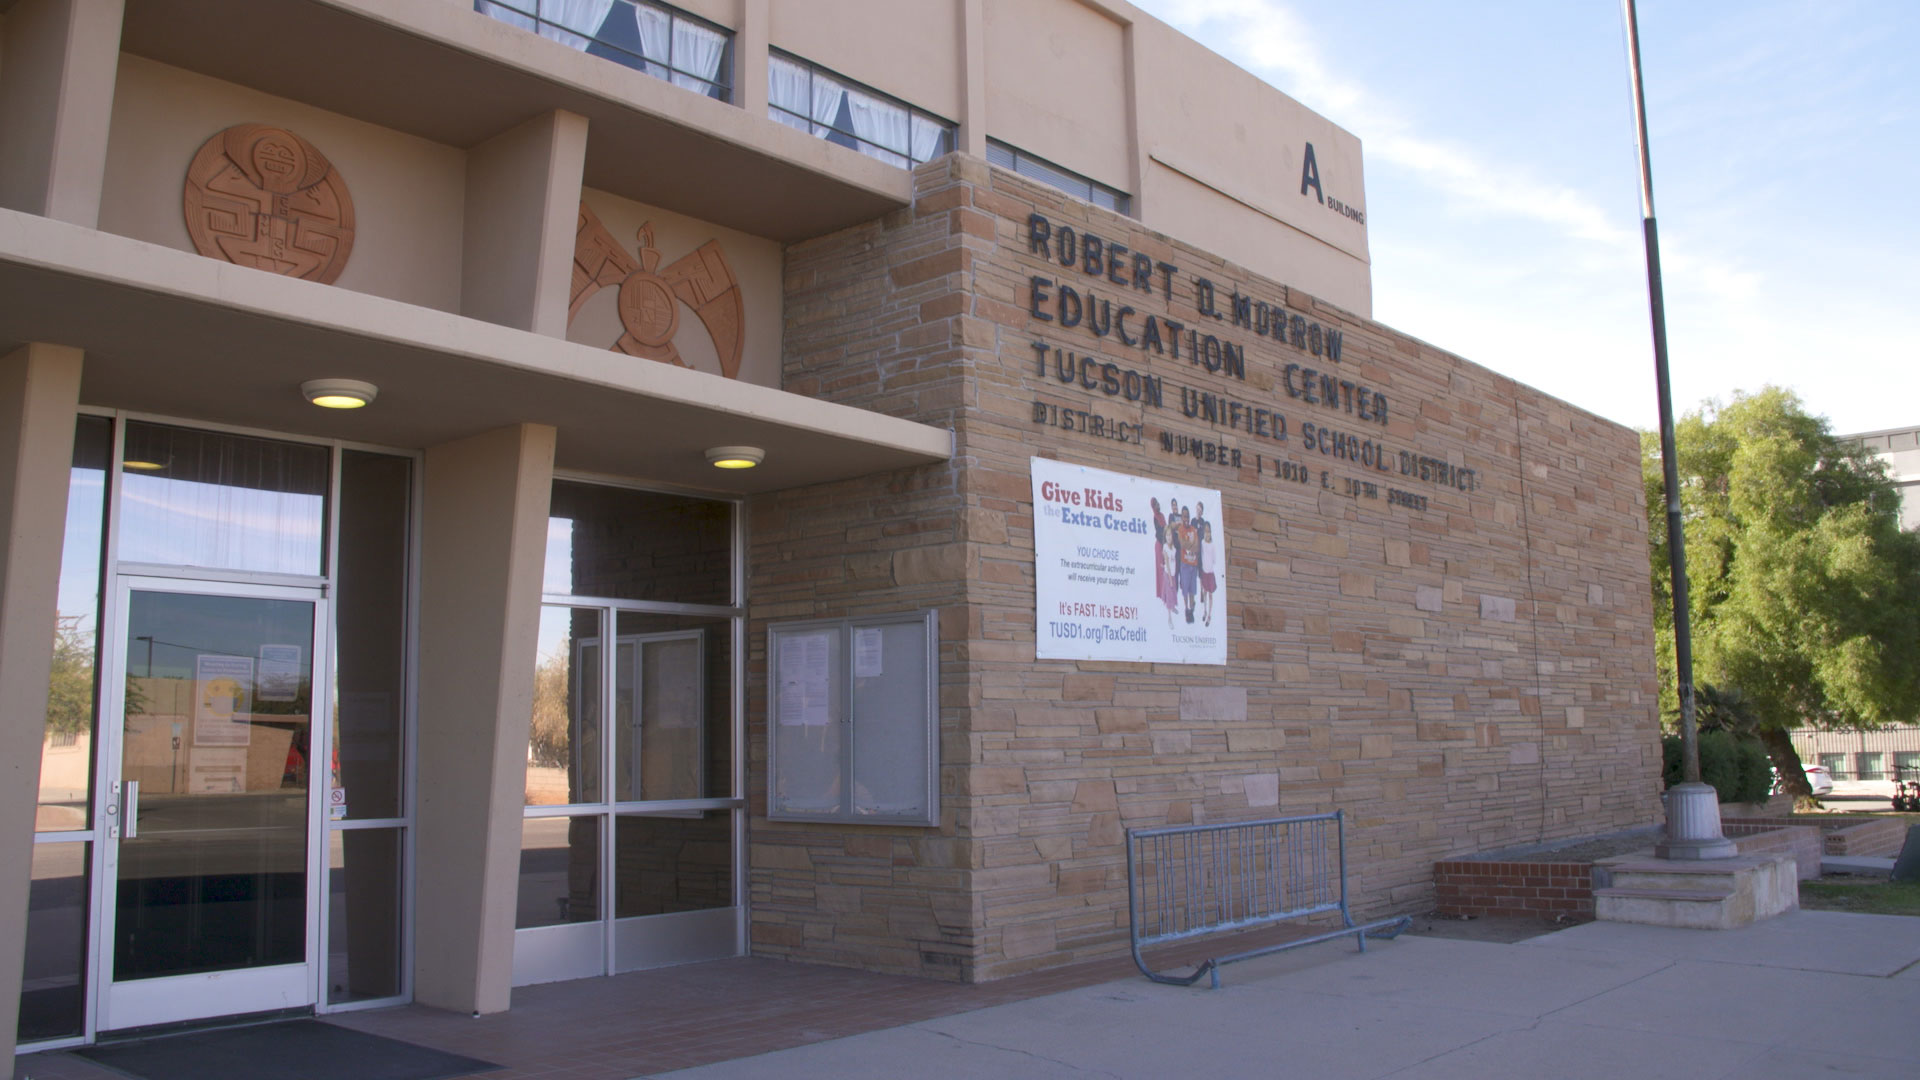 Outside of the Robert D. Morrow Education Center for Tucson Unified School District.